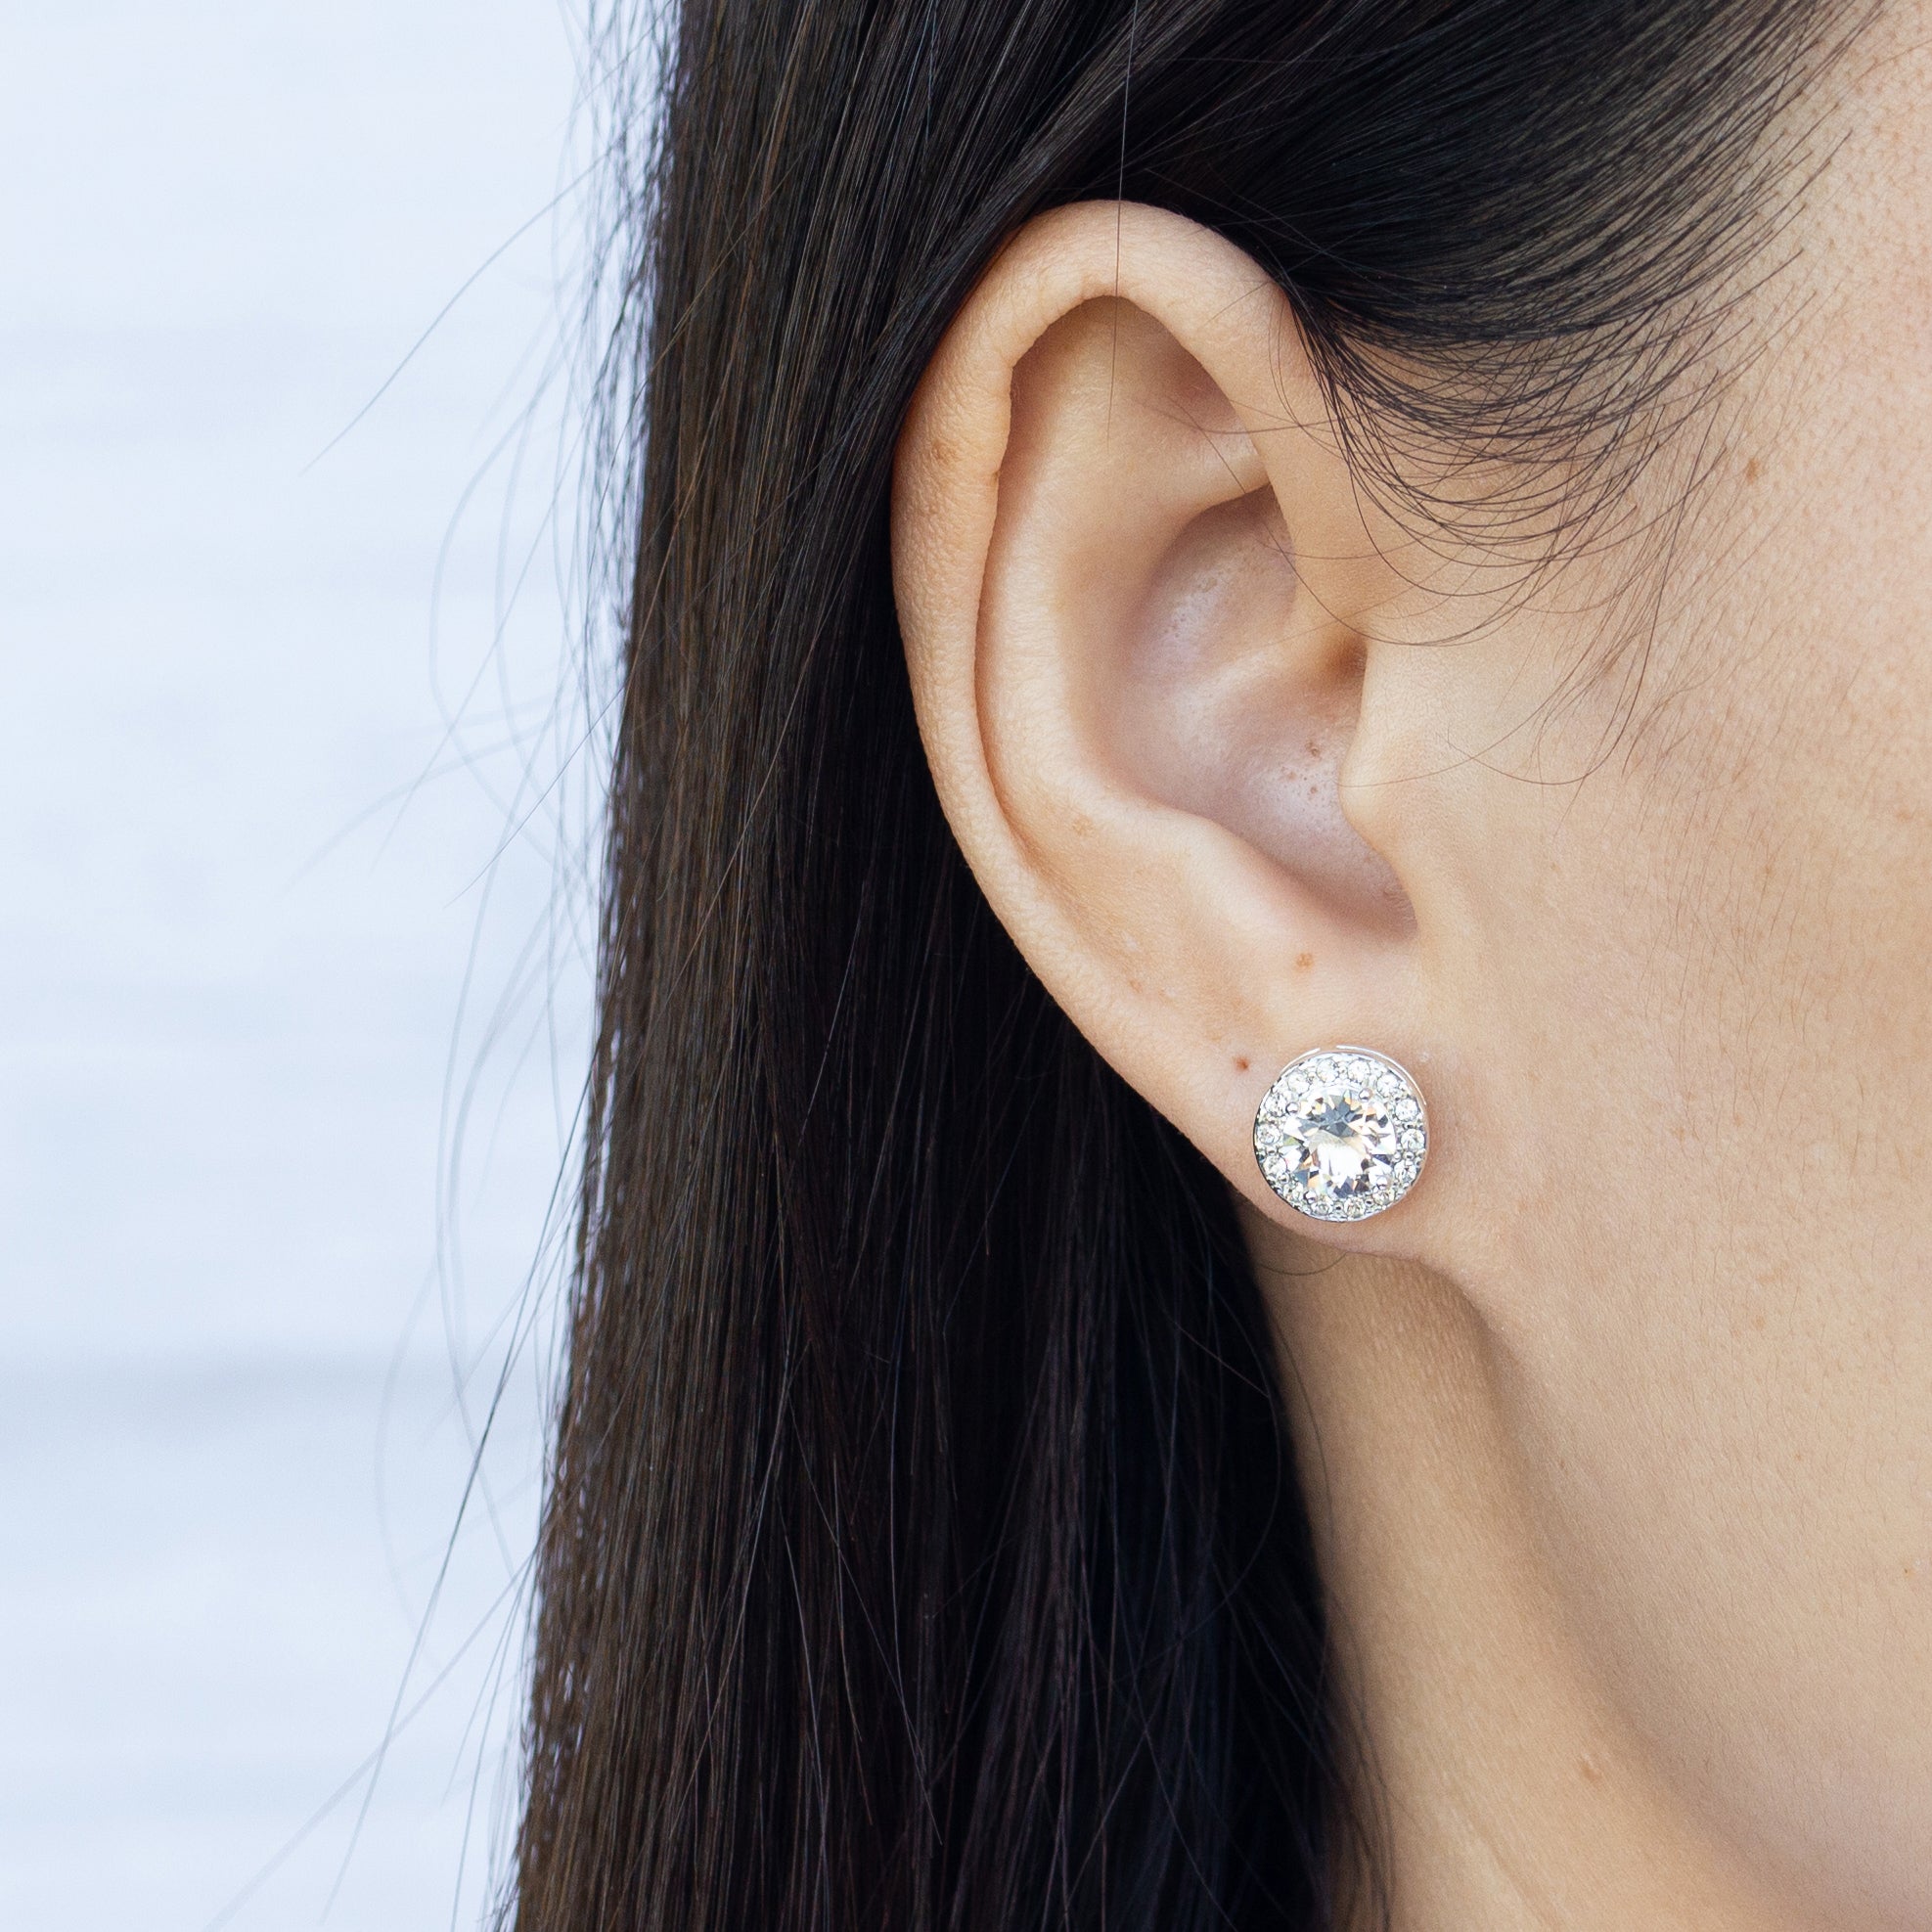 Silver Plated Halo Earrings Created with Zircondia® Crystals